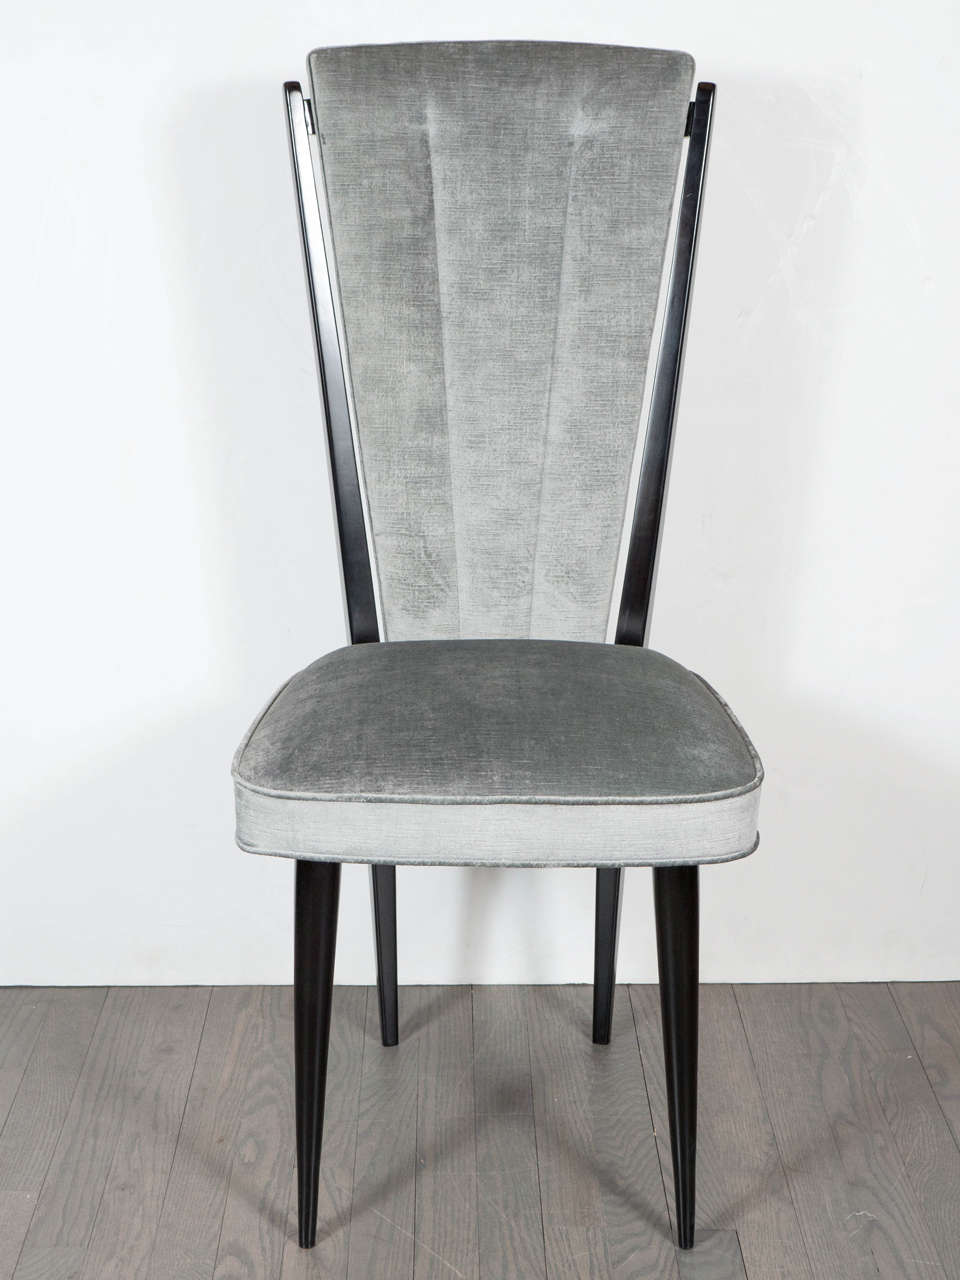 Exceptional set of four Mid-Century Modernist dining chairs in the manner of Gio Ponti with sculptural ebonized walnut frames and upholstered in a lux smoked pewter velvet. Each chair has an elongated upholstered back support that rests at a slight